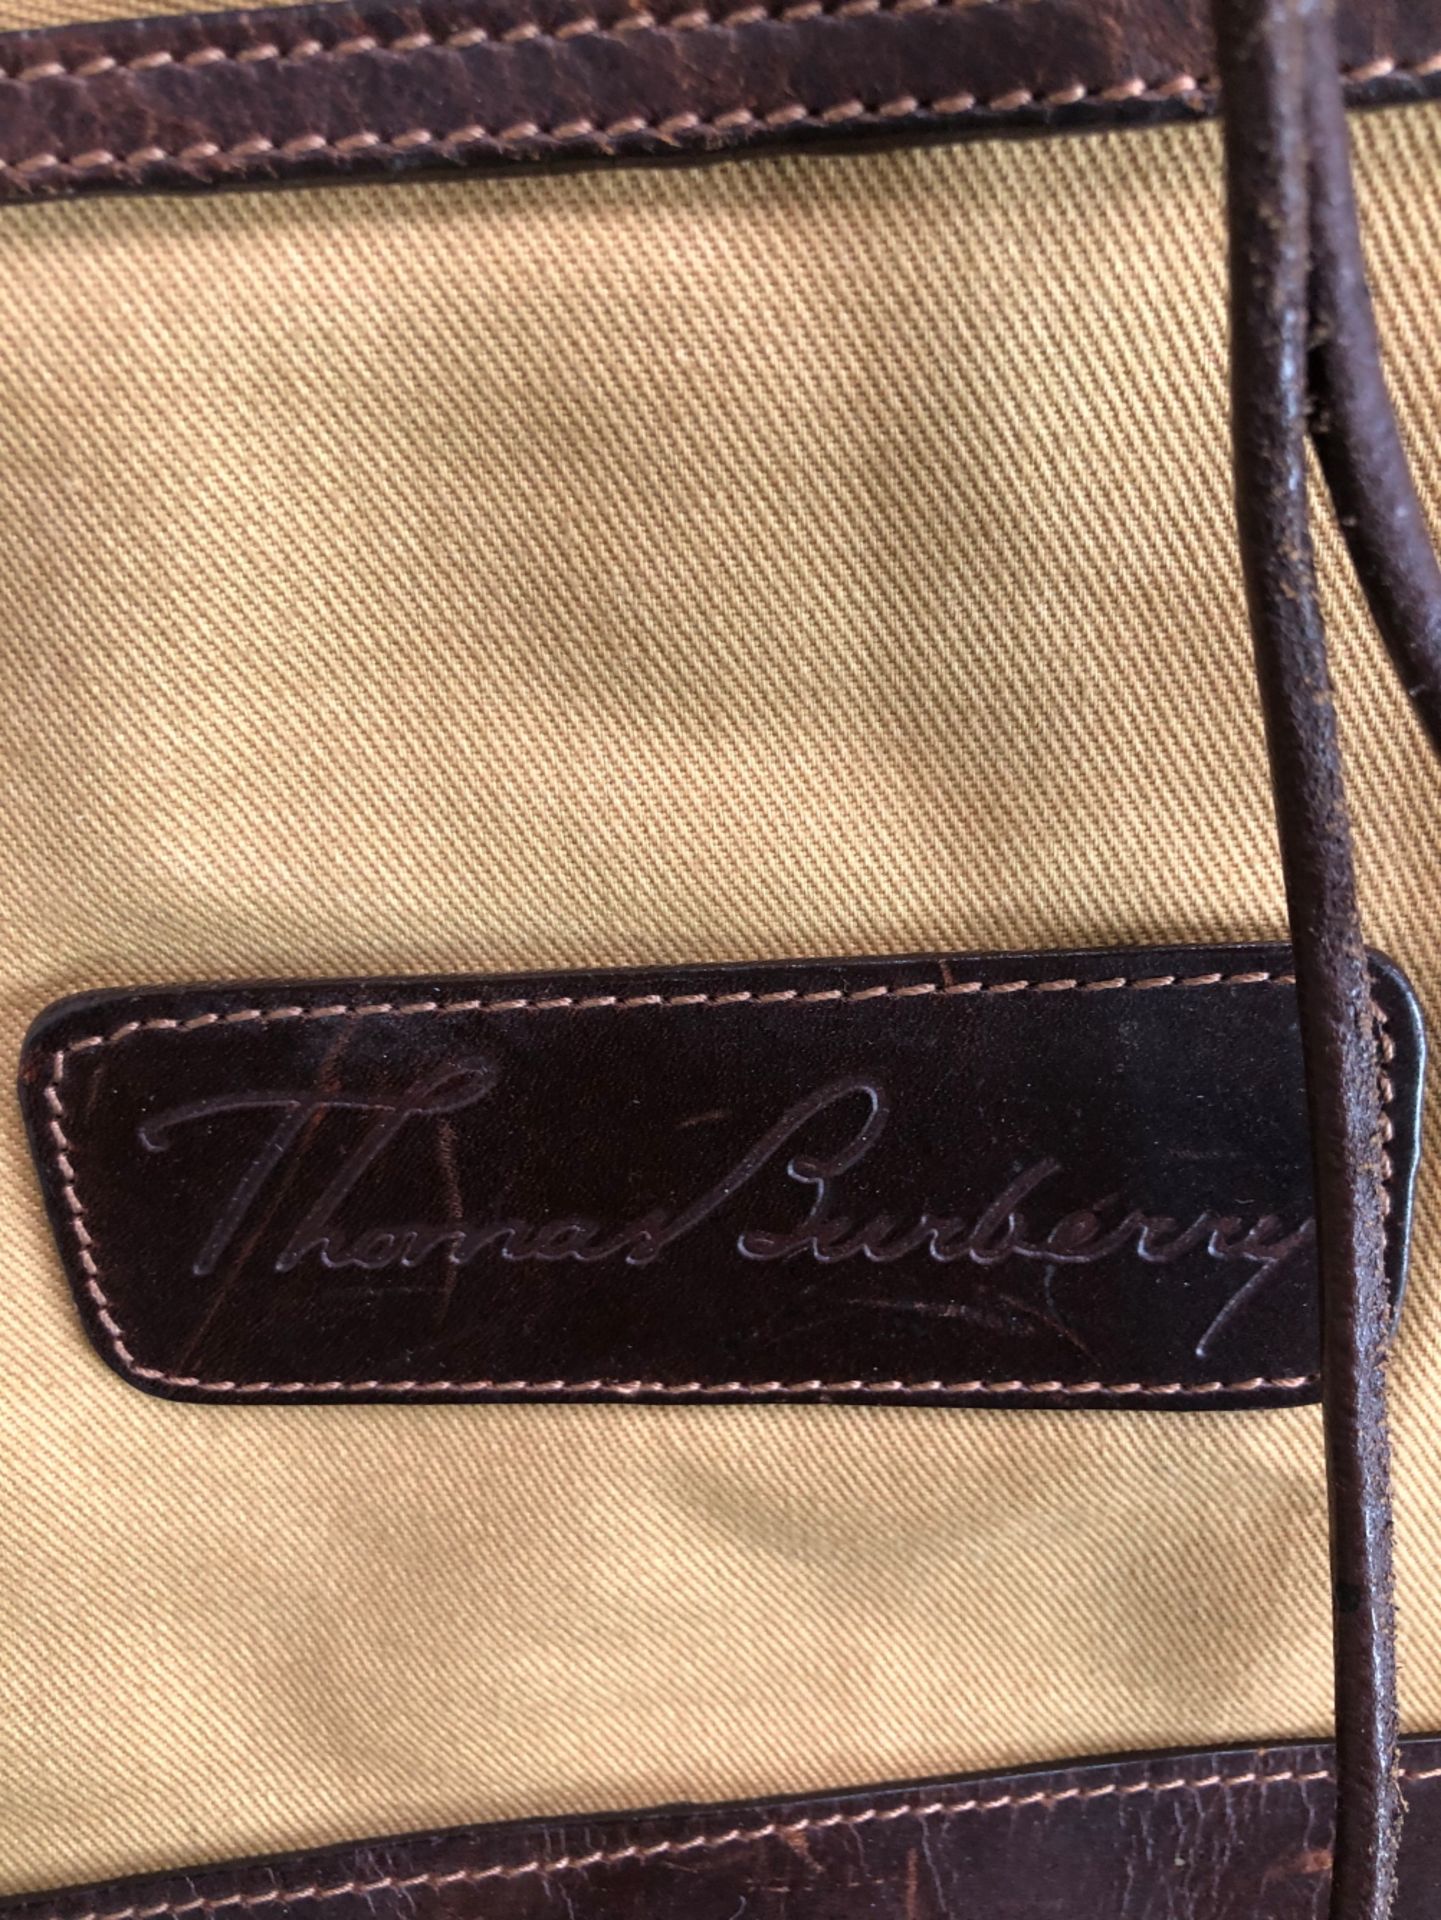 A THOMAS BURBERRY CANVAS BACK PACK. - Image 3 of 8